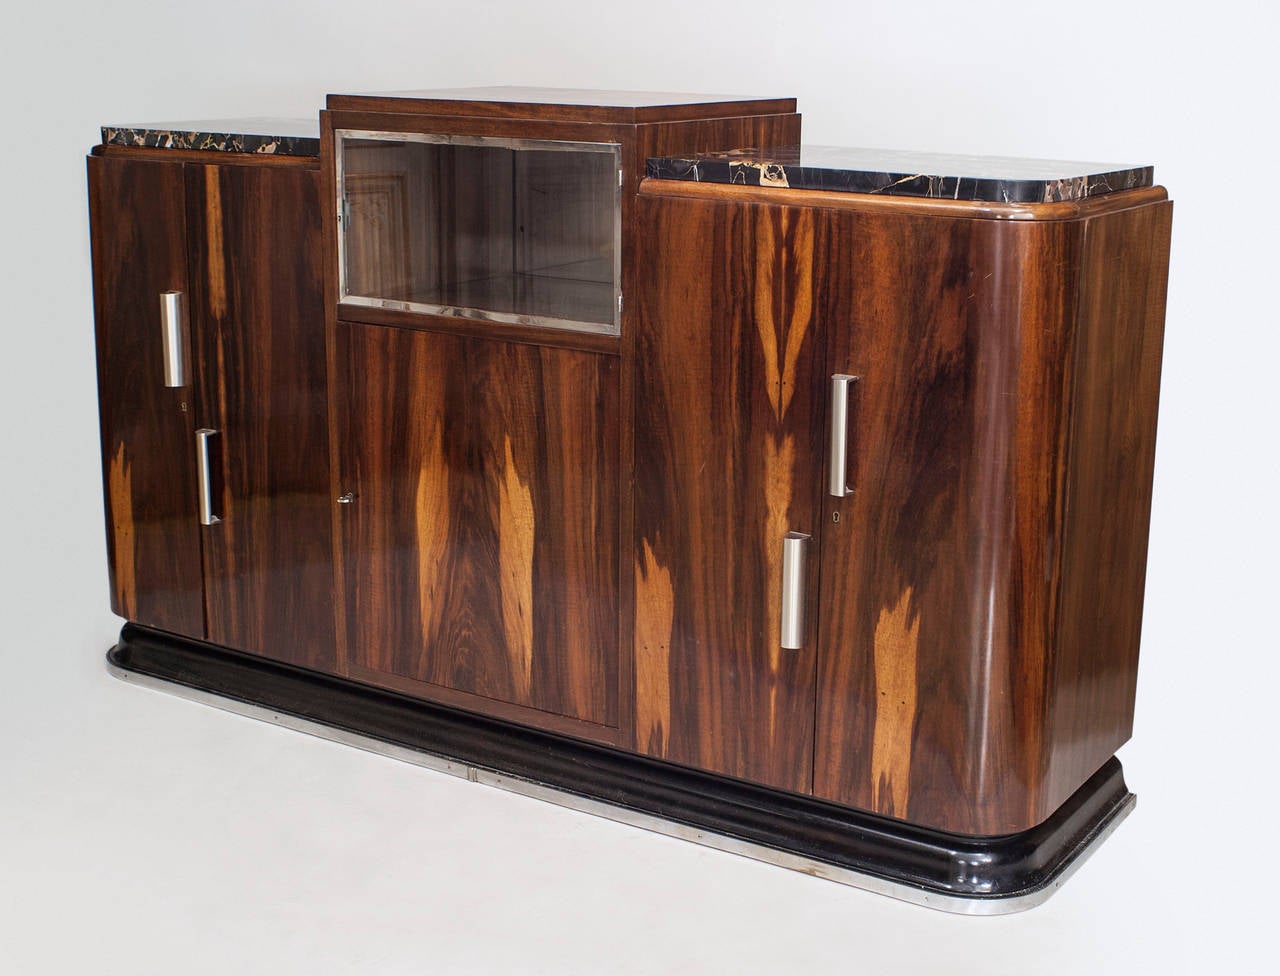 French Art Deco rosewood sideboard with a raised center platform over a glass door shelf centering 2 black marble tops. Doors with chrome handles and trim.
